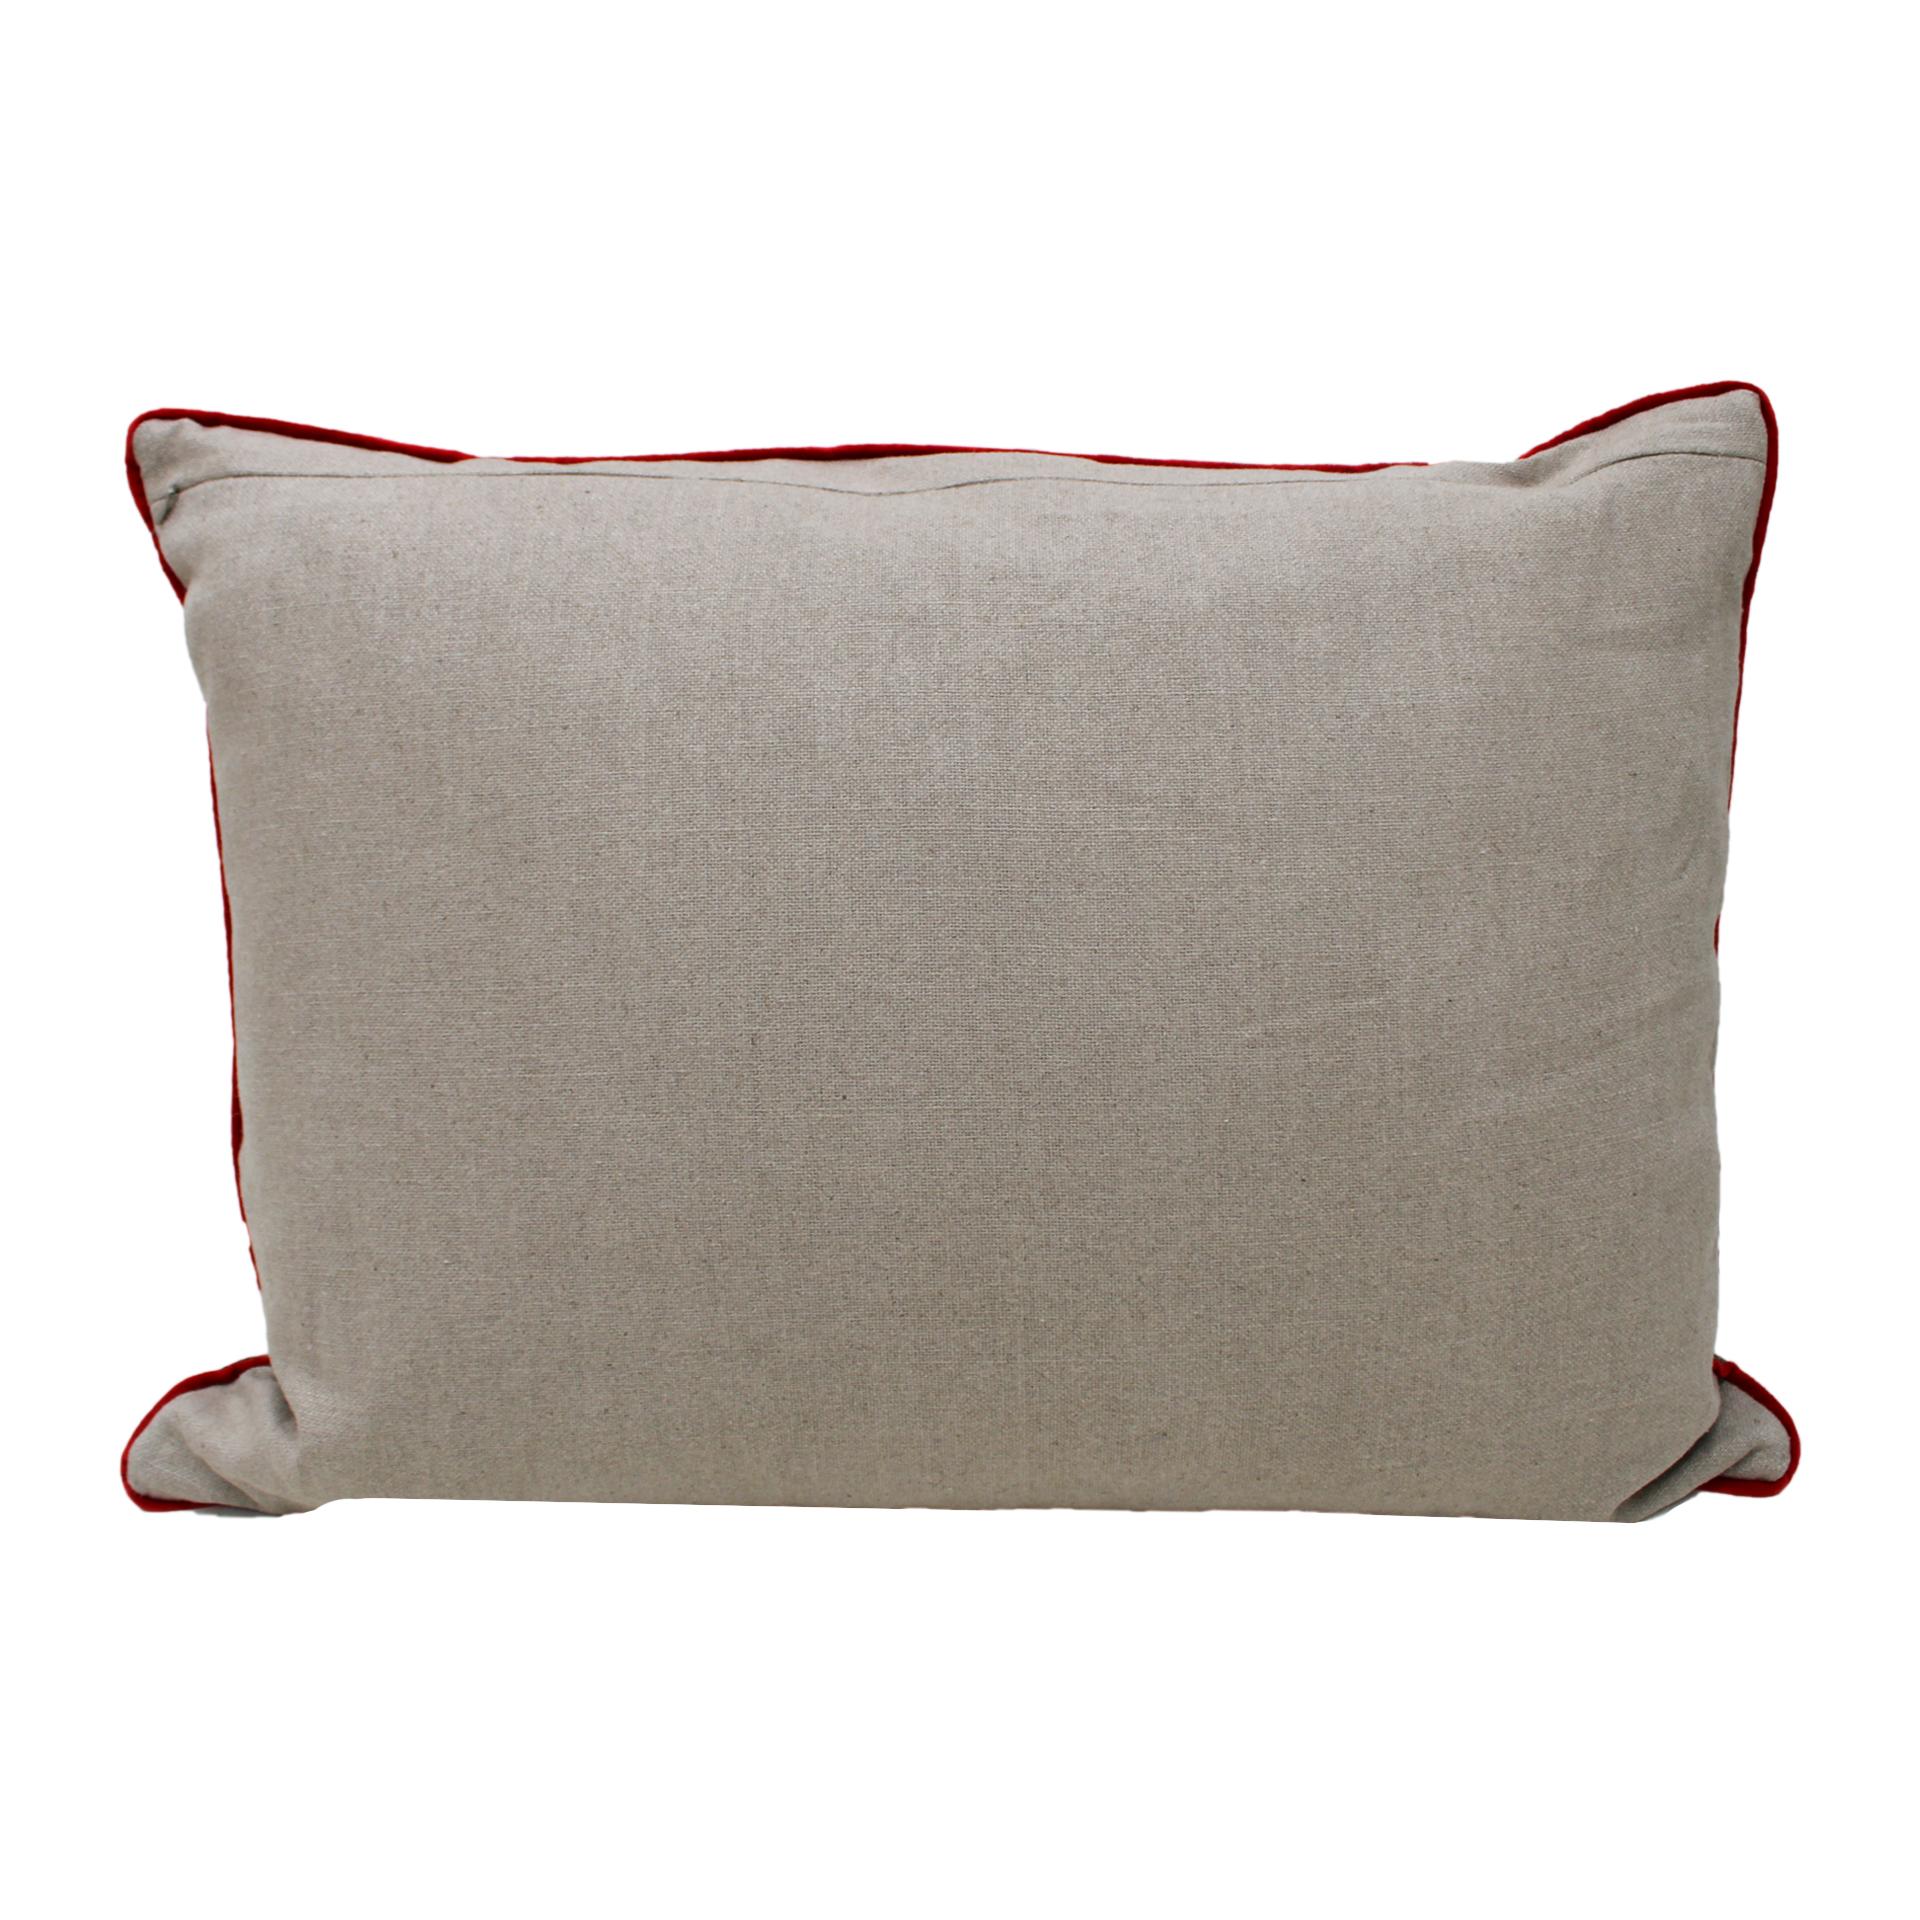 Cushion made with 64% linen and 46% cotton fabric, with a floral print of manual design, finished in red velvet cord and invisible zipper on the back.

Every item LA Studio offers is checked by our team of 10 craftsmen in our in-house workshop.